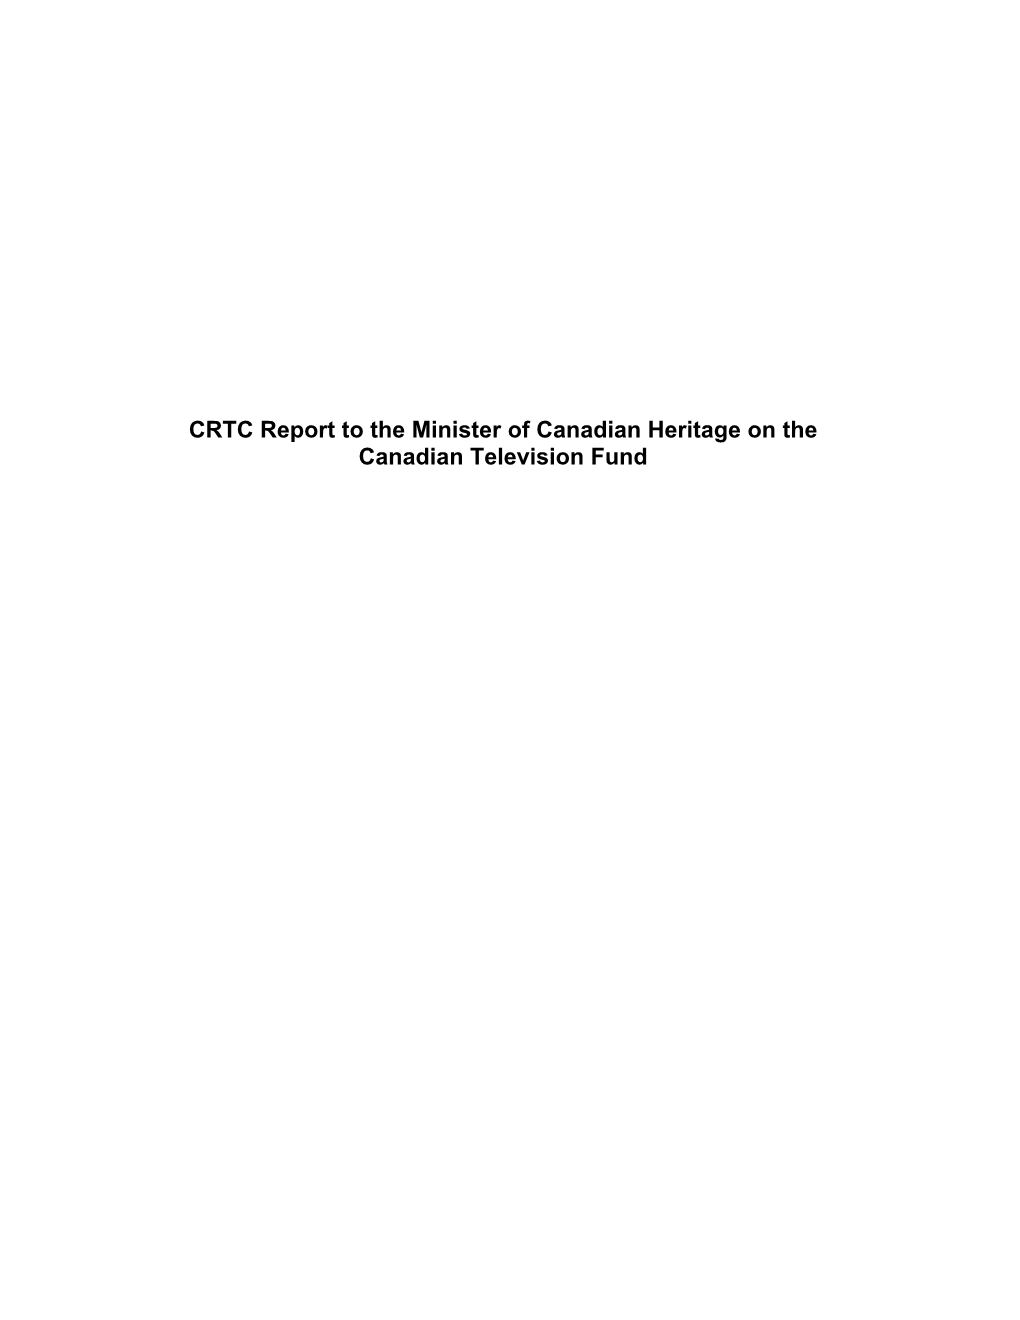 CRTC Report to the Minister of Canadian Heritage on the Canadian Television Fund